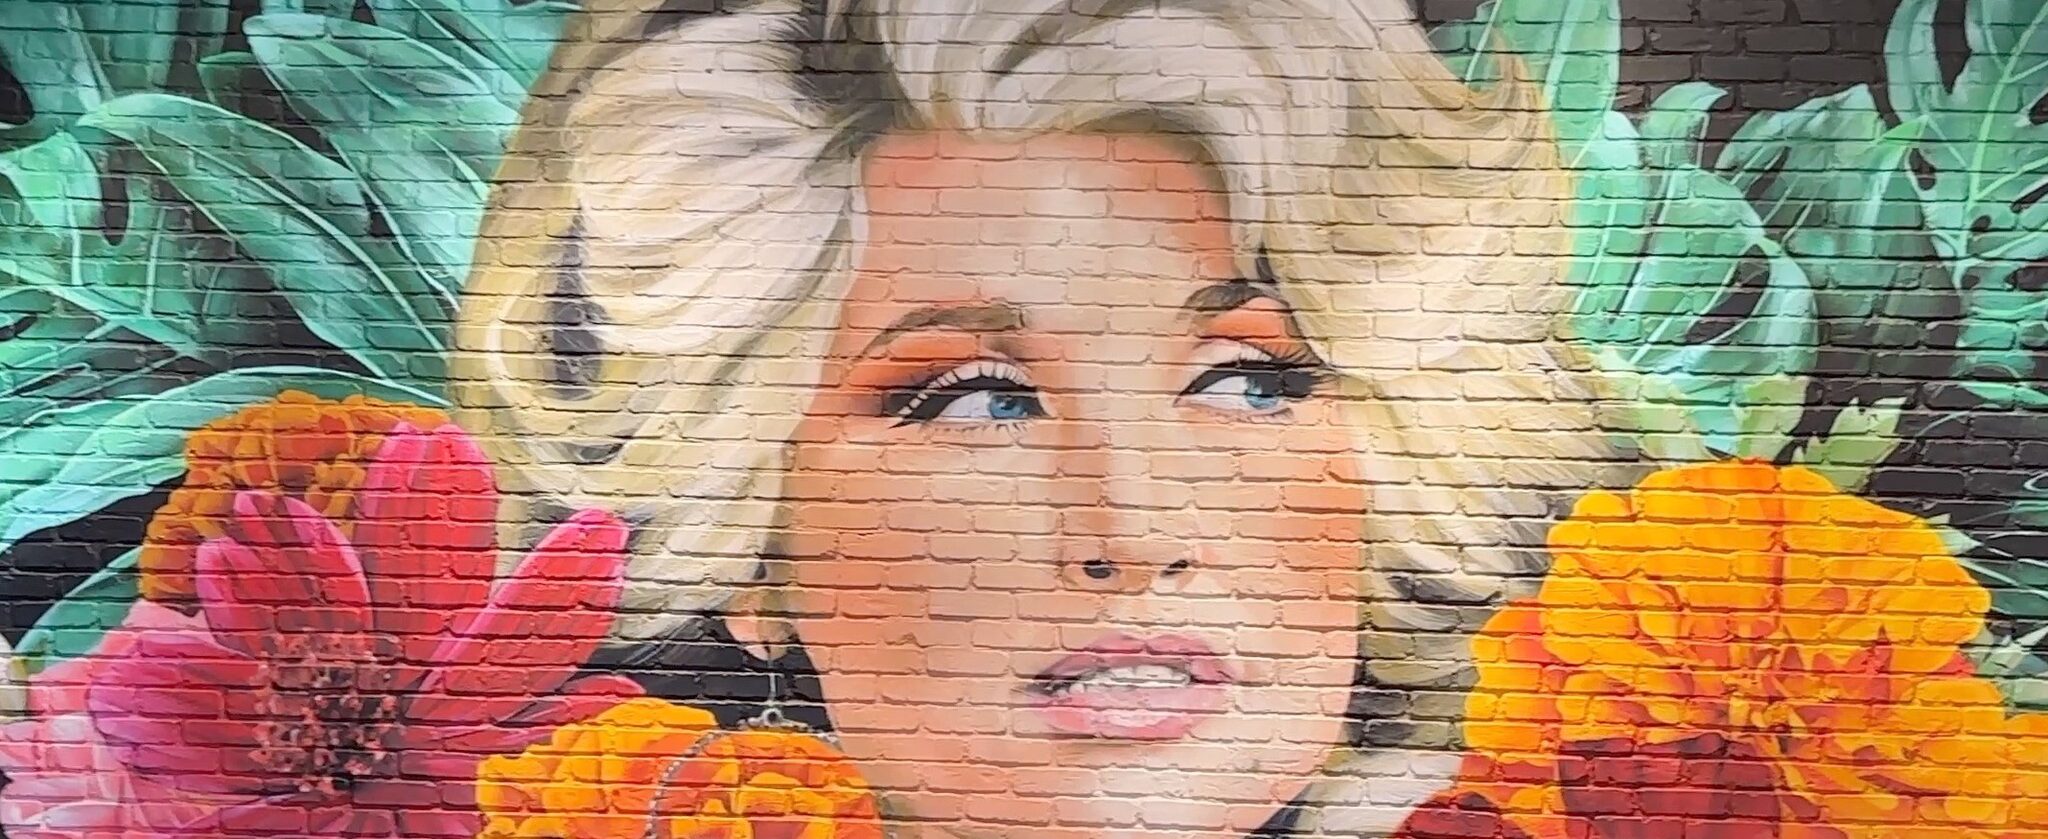 Dolly Parton mural at Azul Cantina in Pigeon Forge, TN